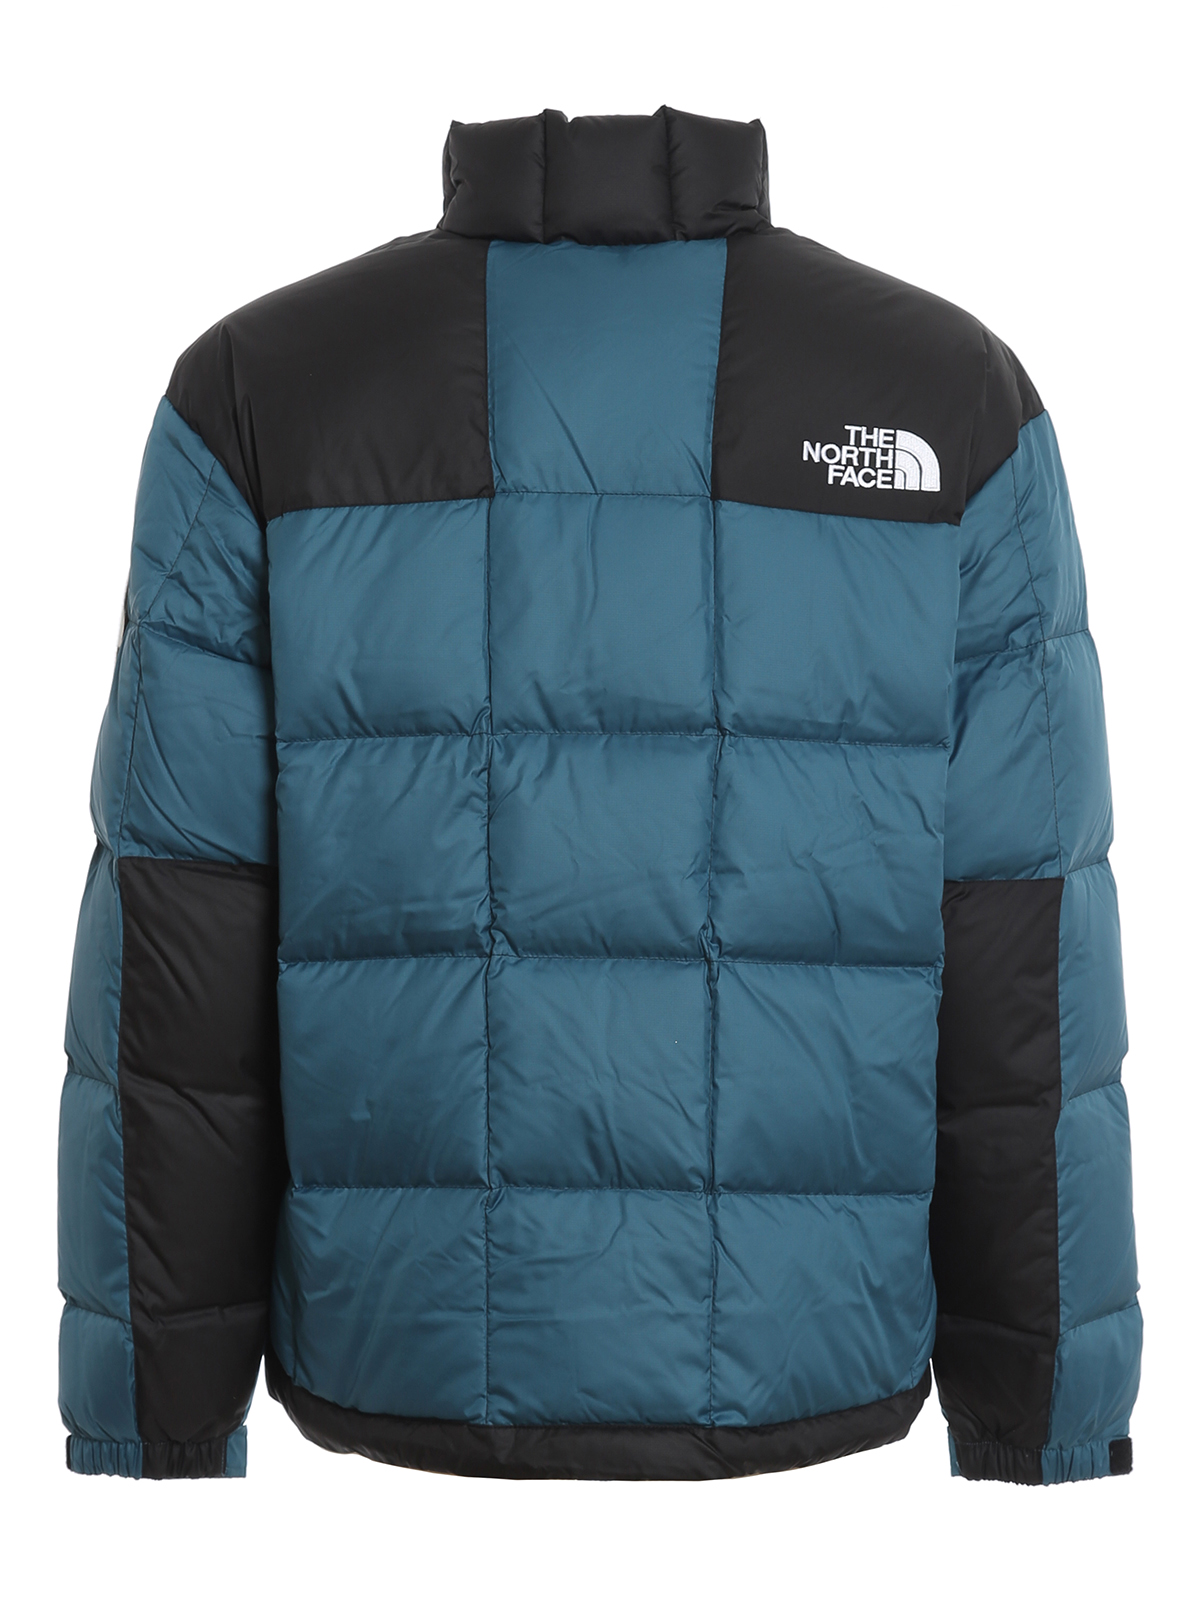 north face cost